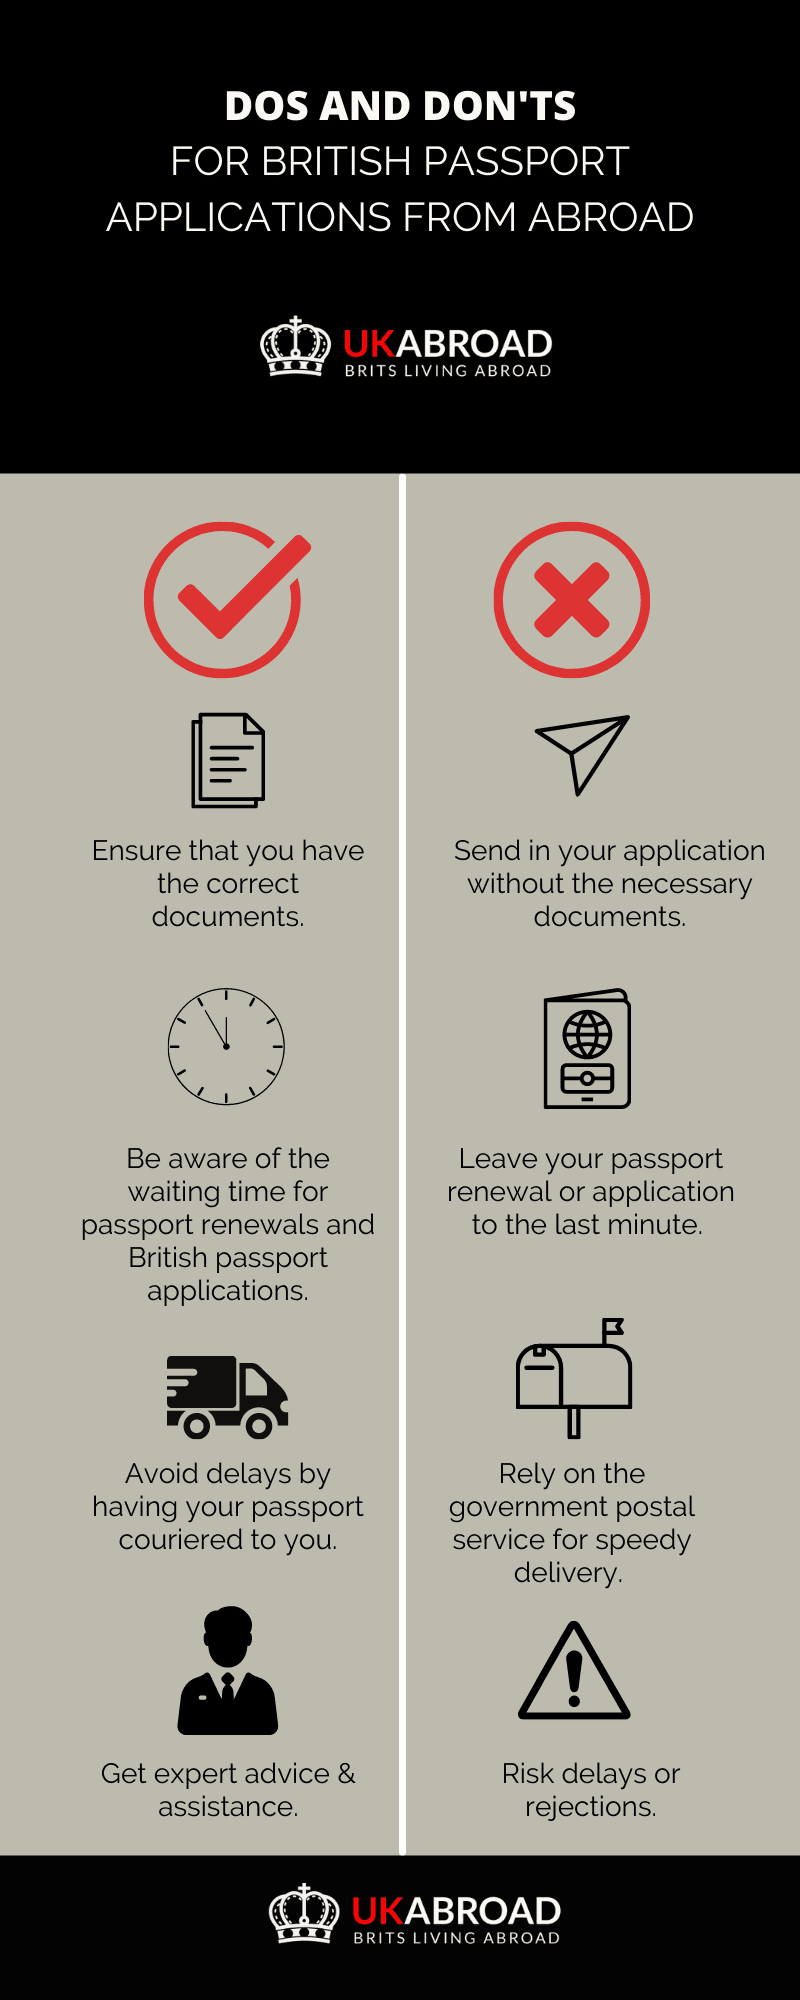 british passport applications from abroad - infographic